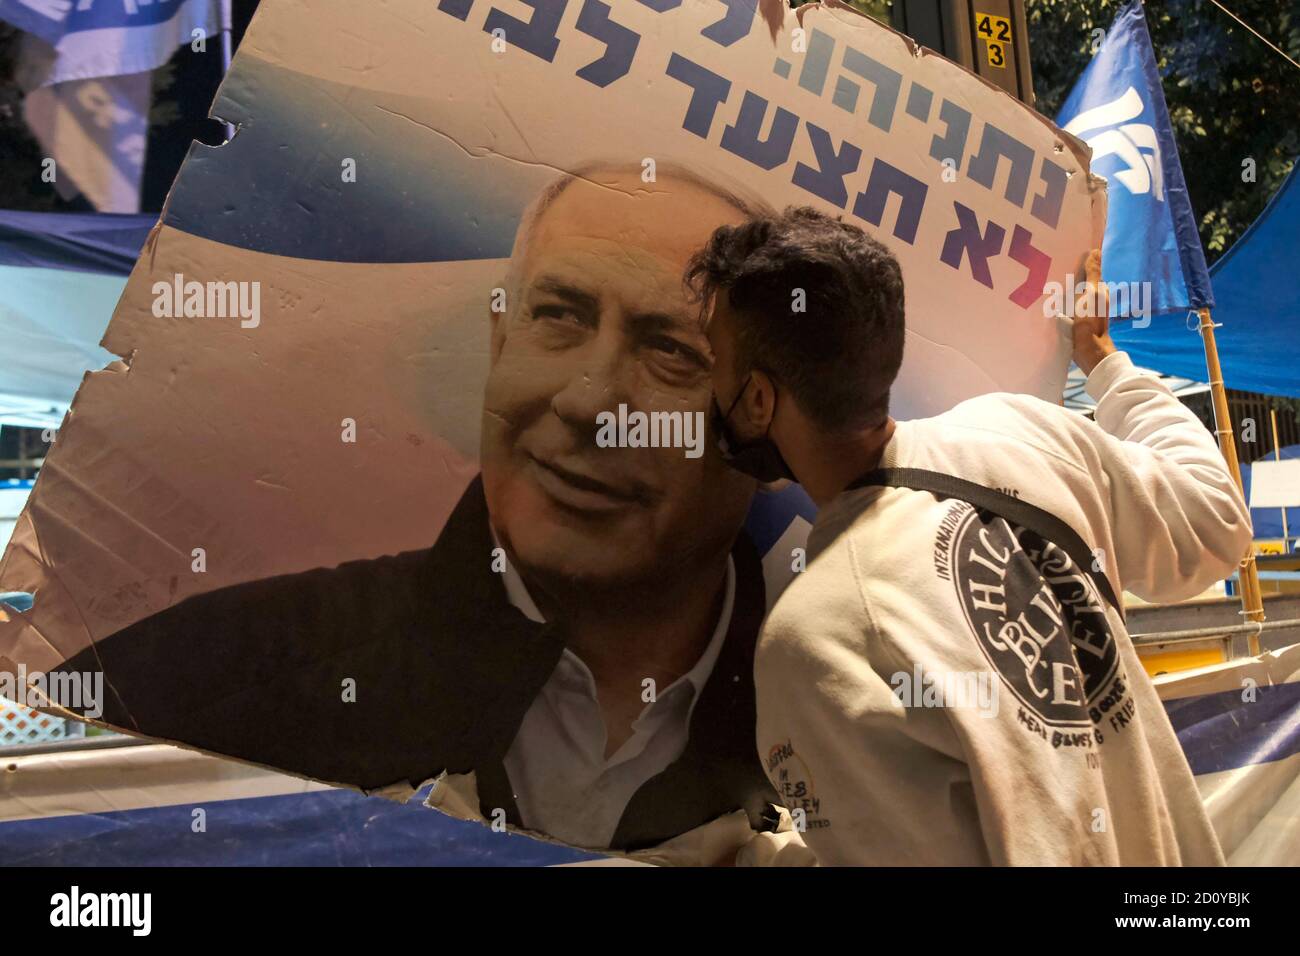 JERUSALEM, ISRAEL - OCTOBER 03: A pro-Netanyahu counter-protester kissing a poster bearing the image of Netanyahu with a writing 'You will never walk alone' during a demonstration in front of prime minister's official residence despite a nationwide lockdown aimed at curbing the coronavirus pandemic on October 03, 2020 in Jerusalem, Israel. Israeli parliament approved last week a law restricting demonstrations as part of a coronavirus-related state of emergency, that critics say is aimed at silencing protests against Netanyahu over his indictment on corruption charges Stock Photo